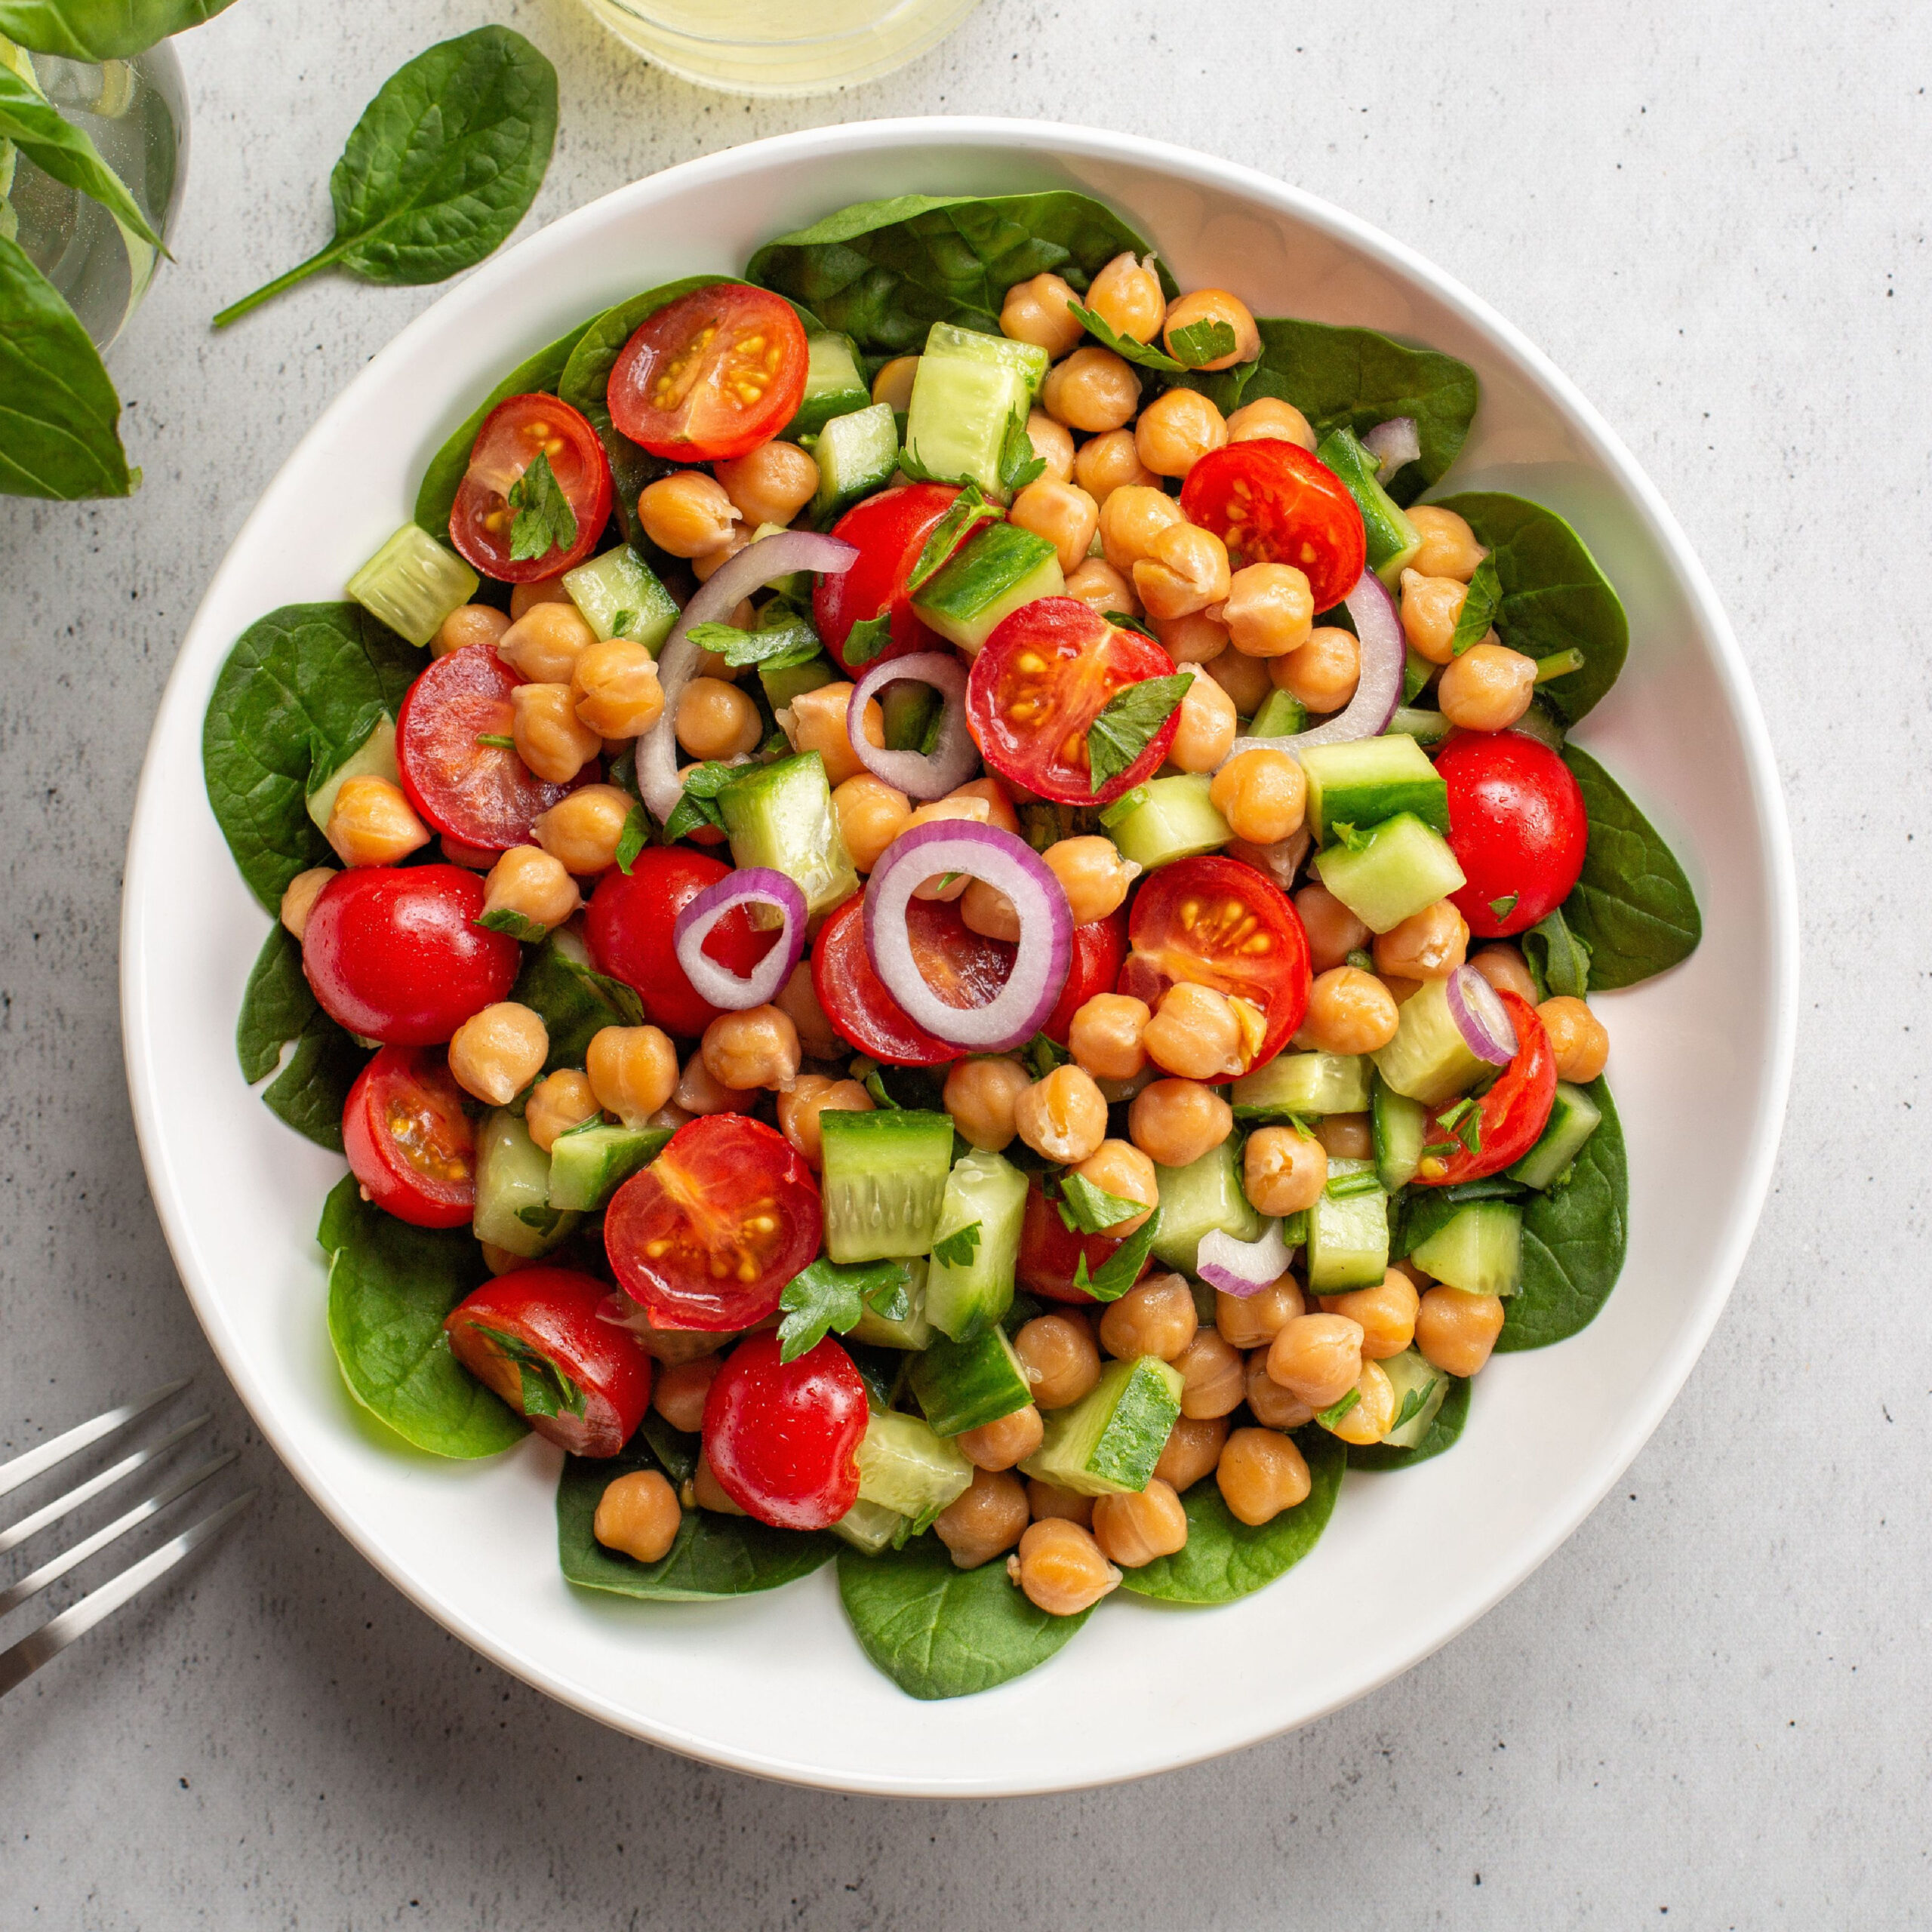 salad topped with cherry tomatoes, cucumber, chickpeas, red onion